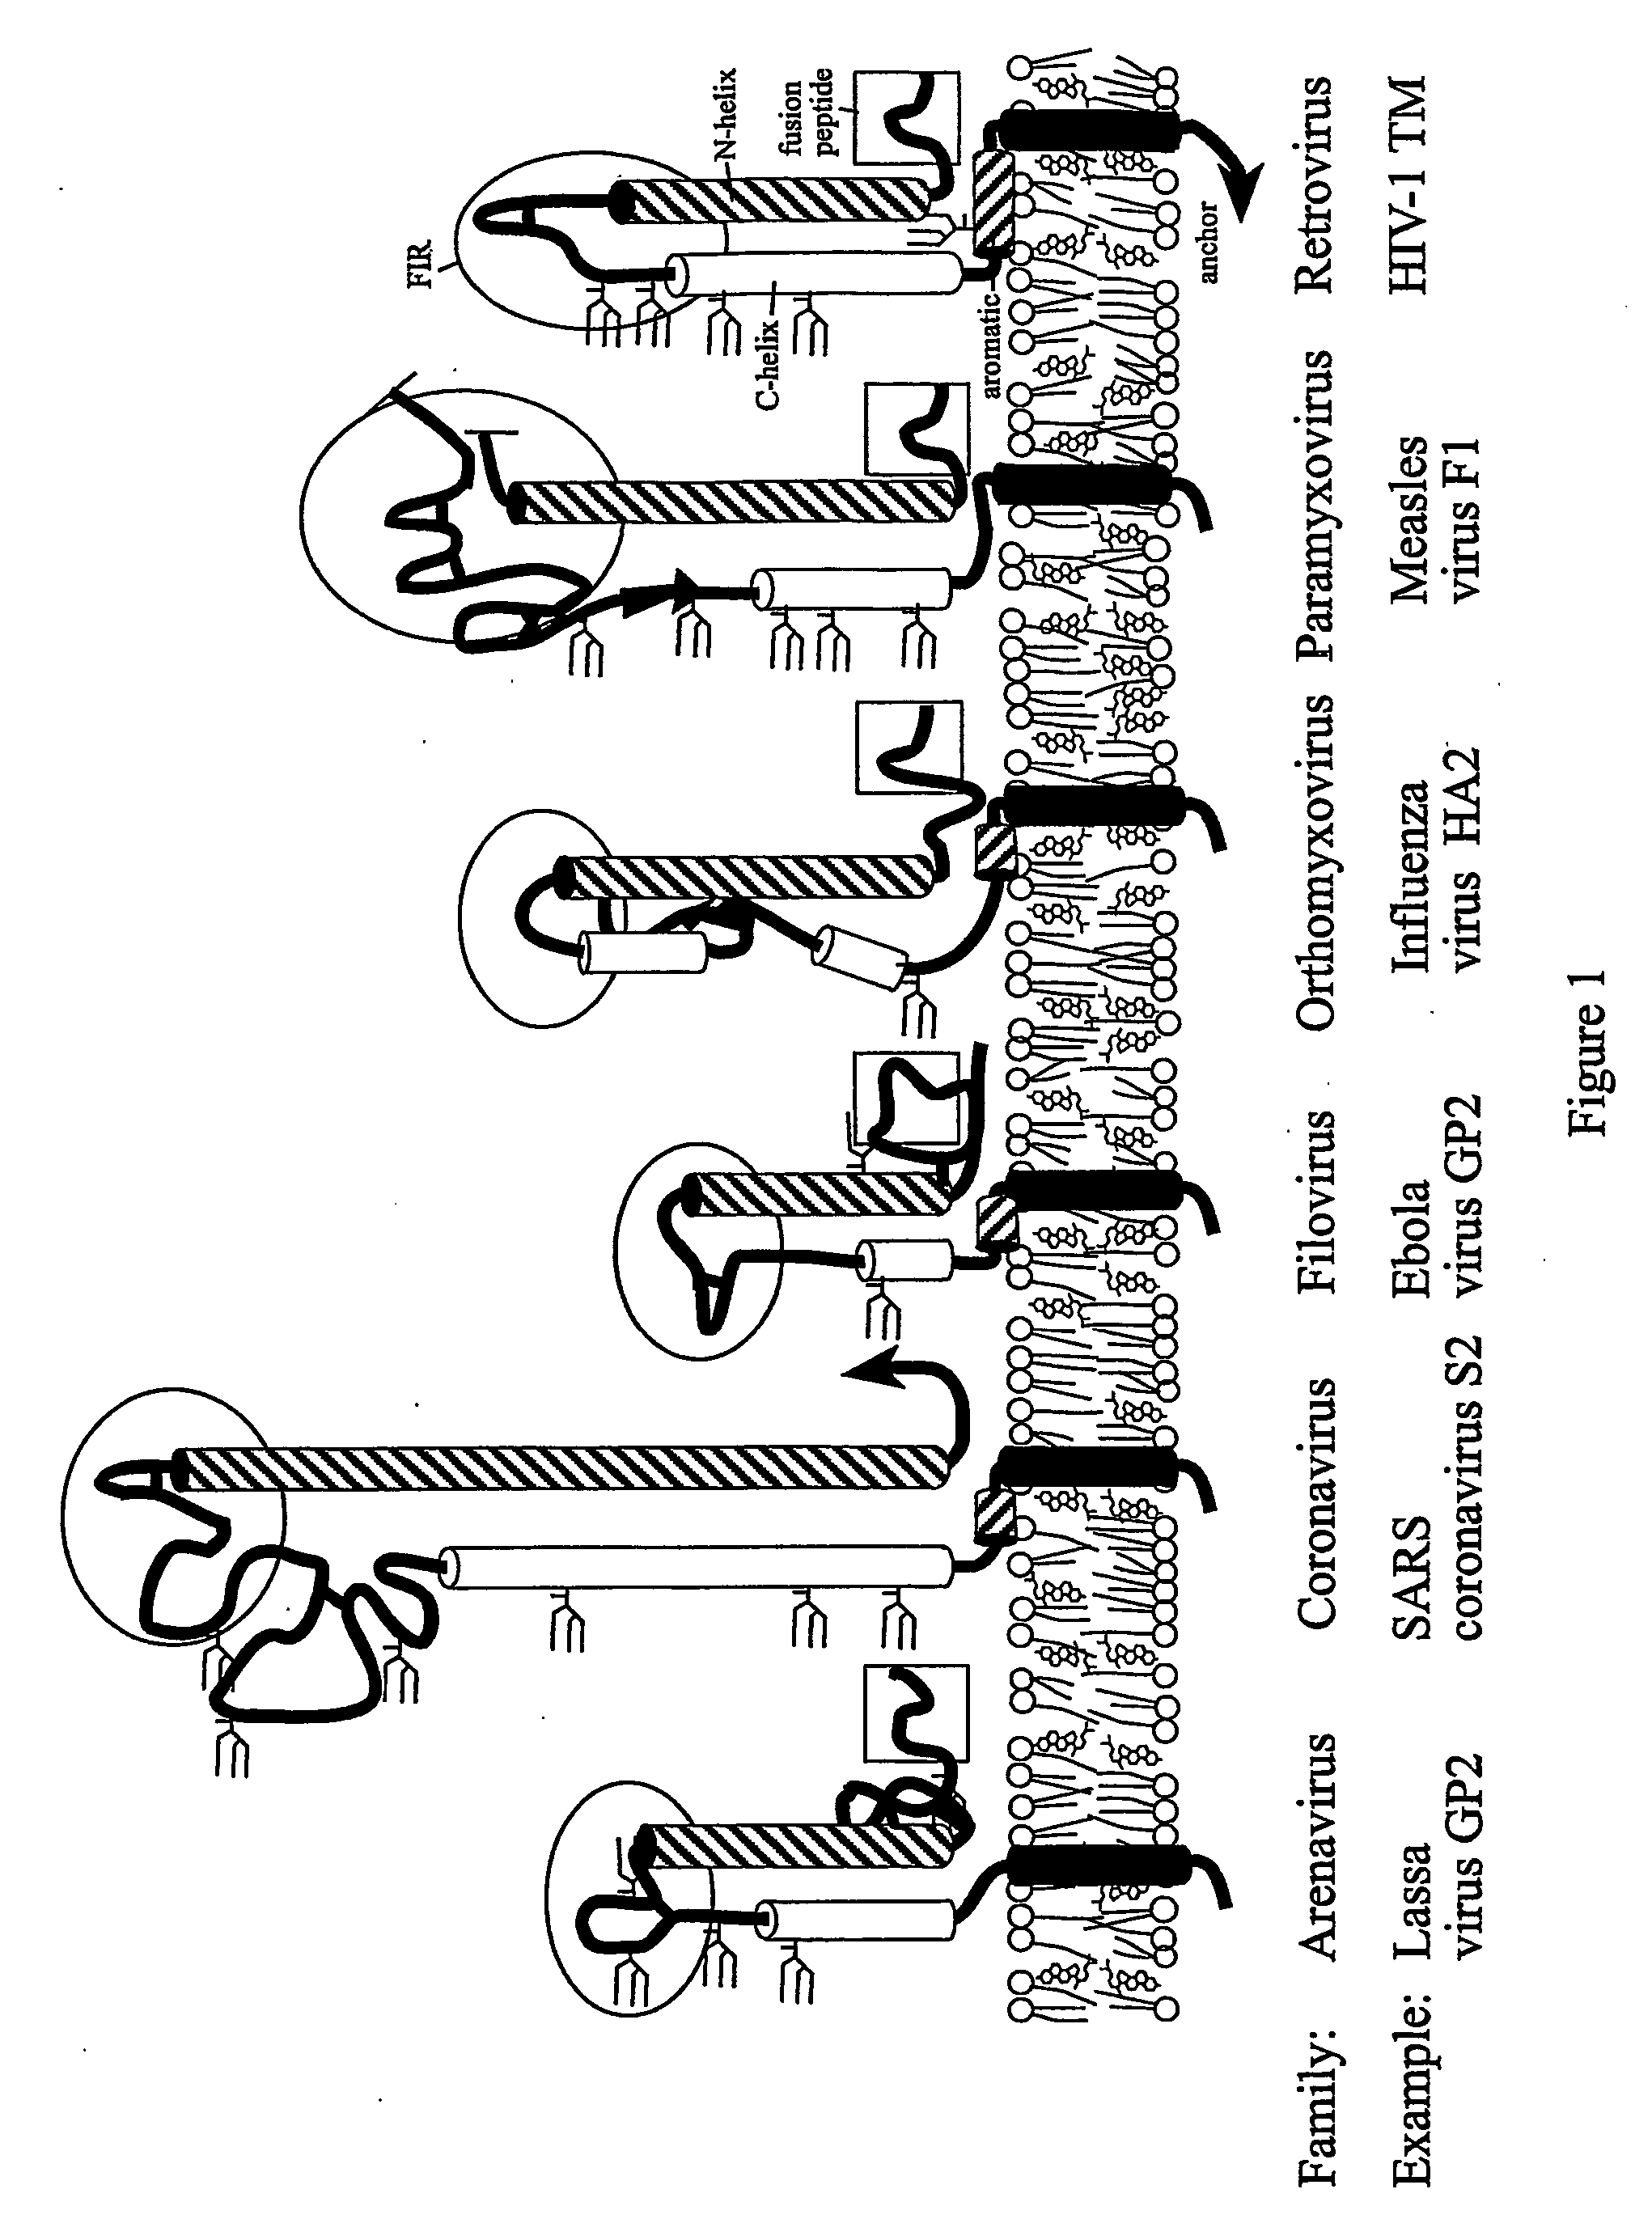 Method of preventing virus: cell fusion by inhibiting the function of the fusion initiation region in rna viruses having class i membrane fusogenic envelope proteins